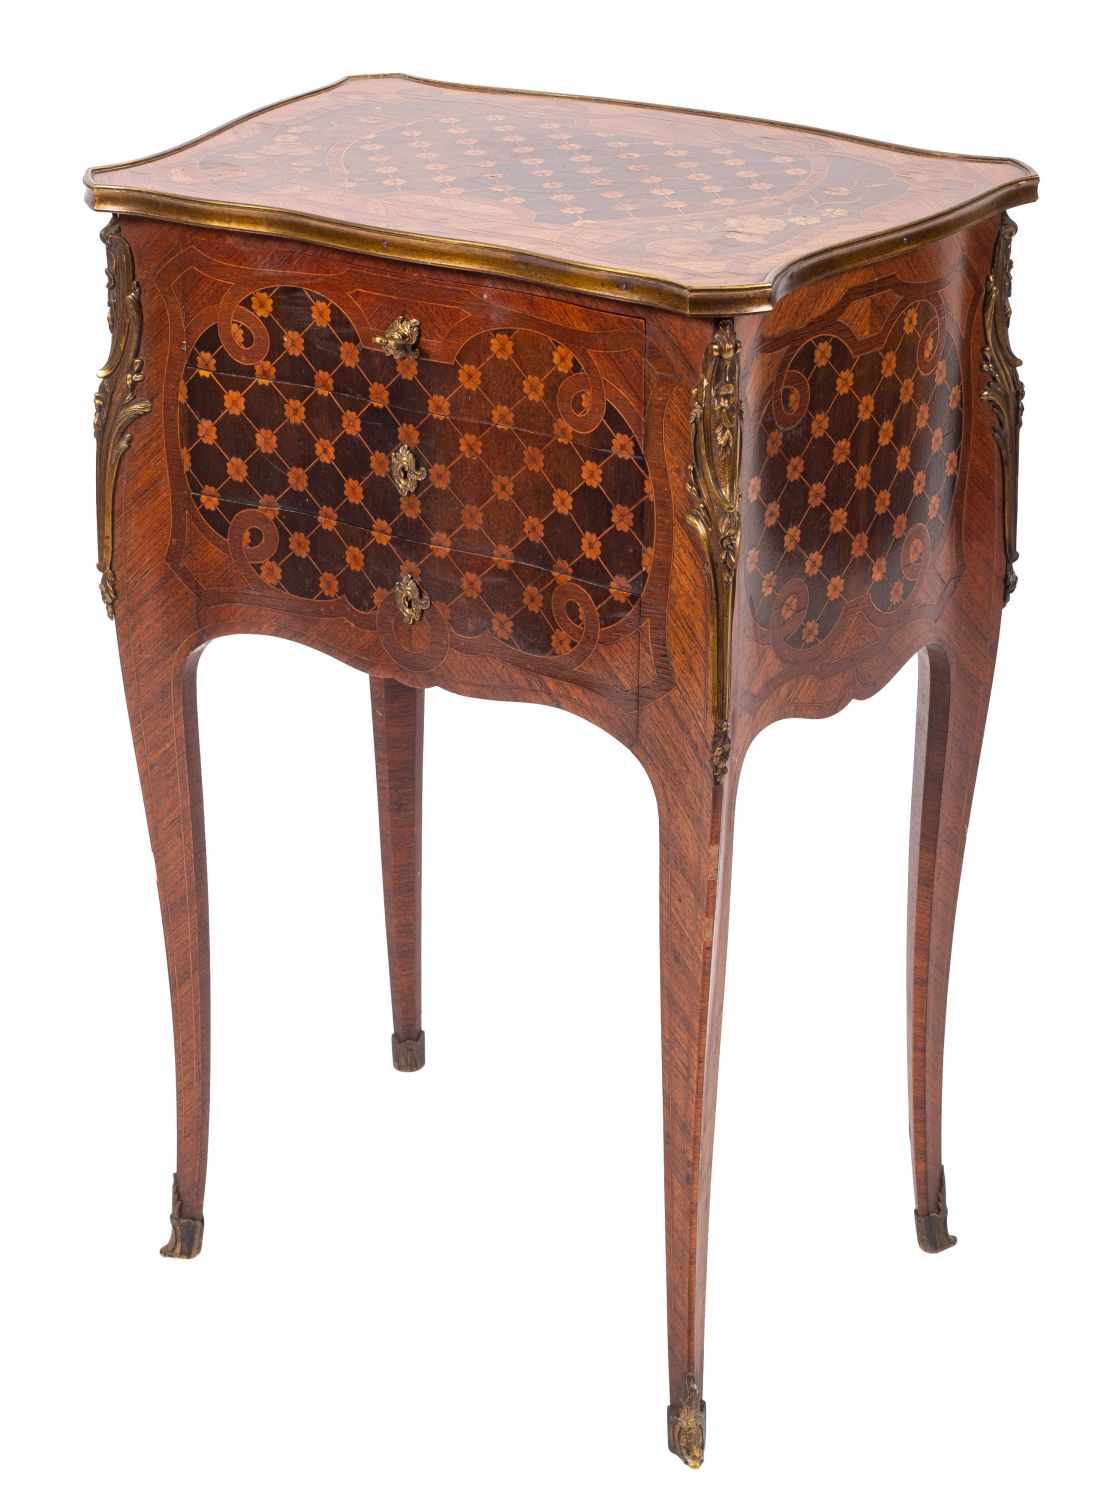 Paul Sormani (1817-1877) - A 19th-century French kingwood, - Image 2 of 2